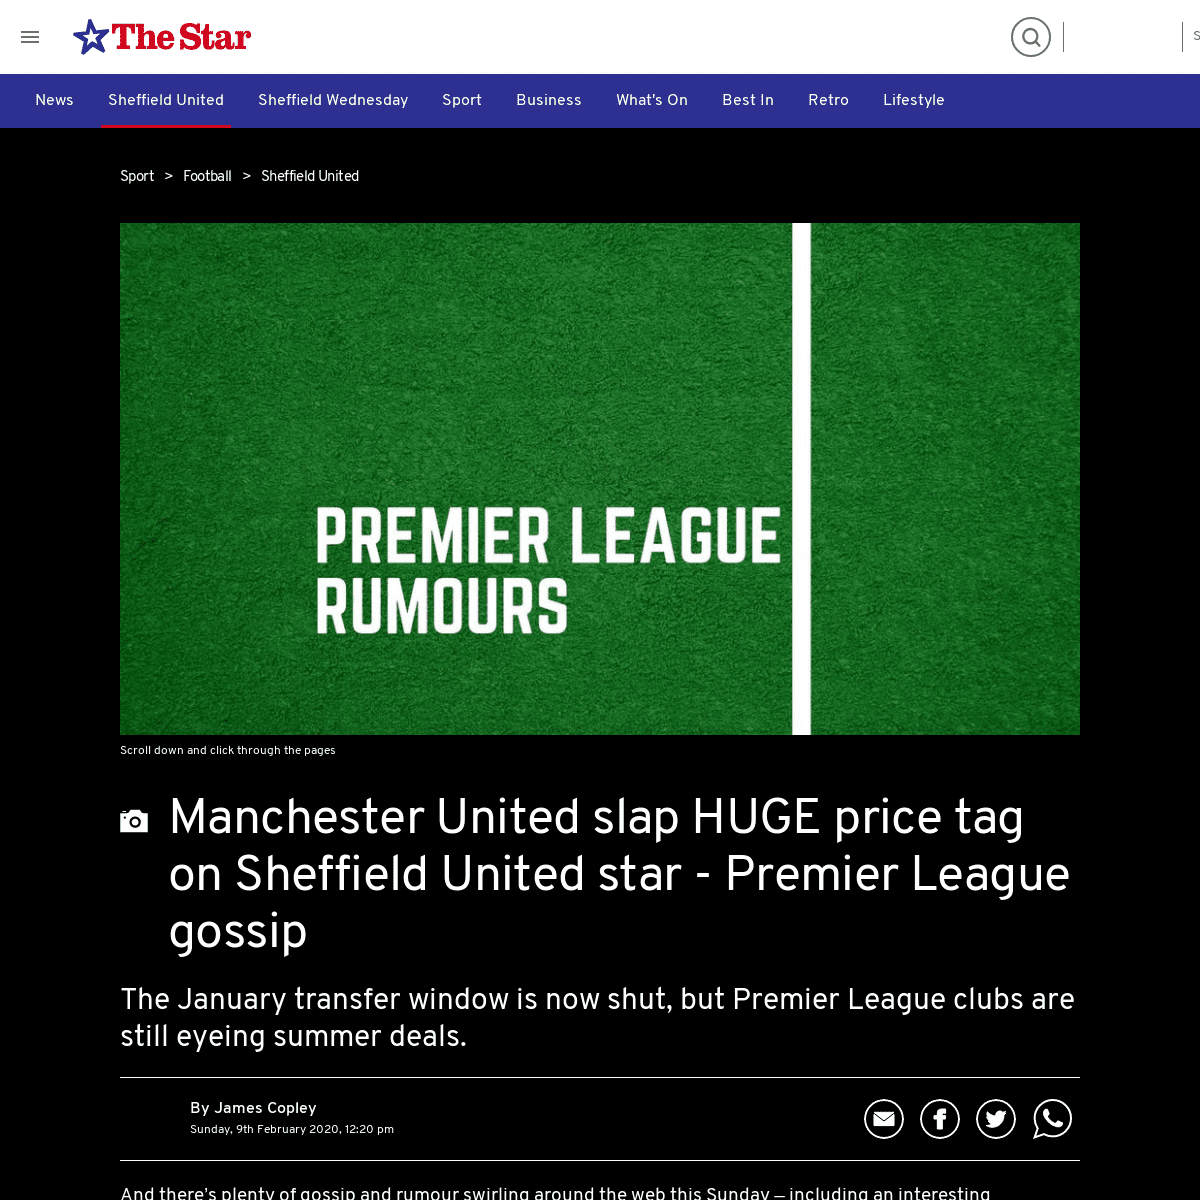 A complete backup of www.thestar.co.uk/sport/football/sheffield-united/manchester-united-slap-huge-price-tag-sheffield-united-st